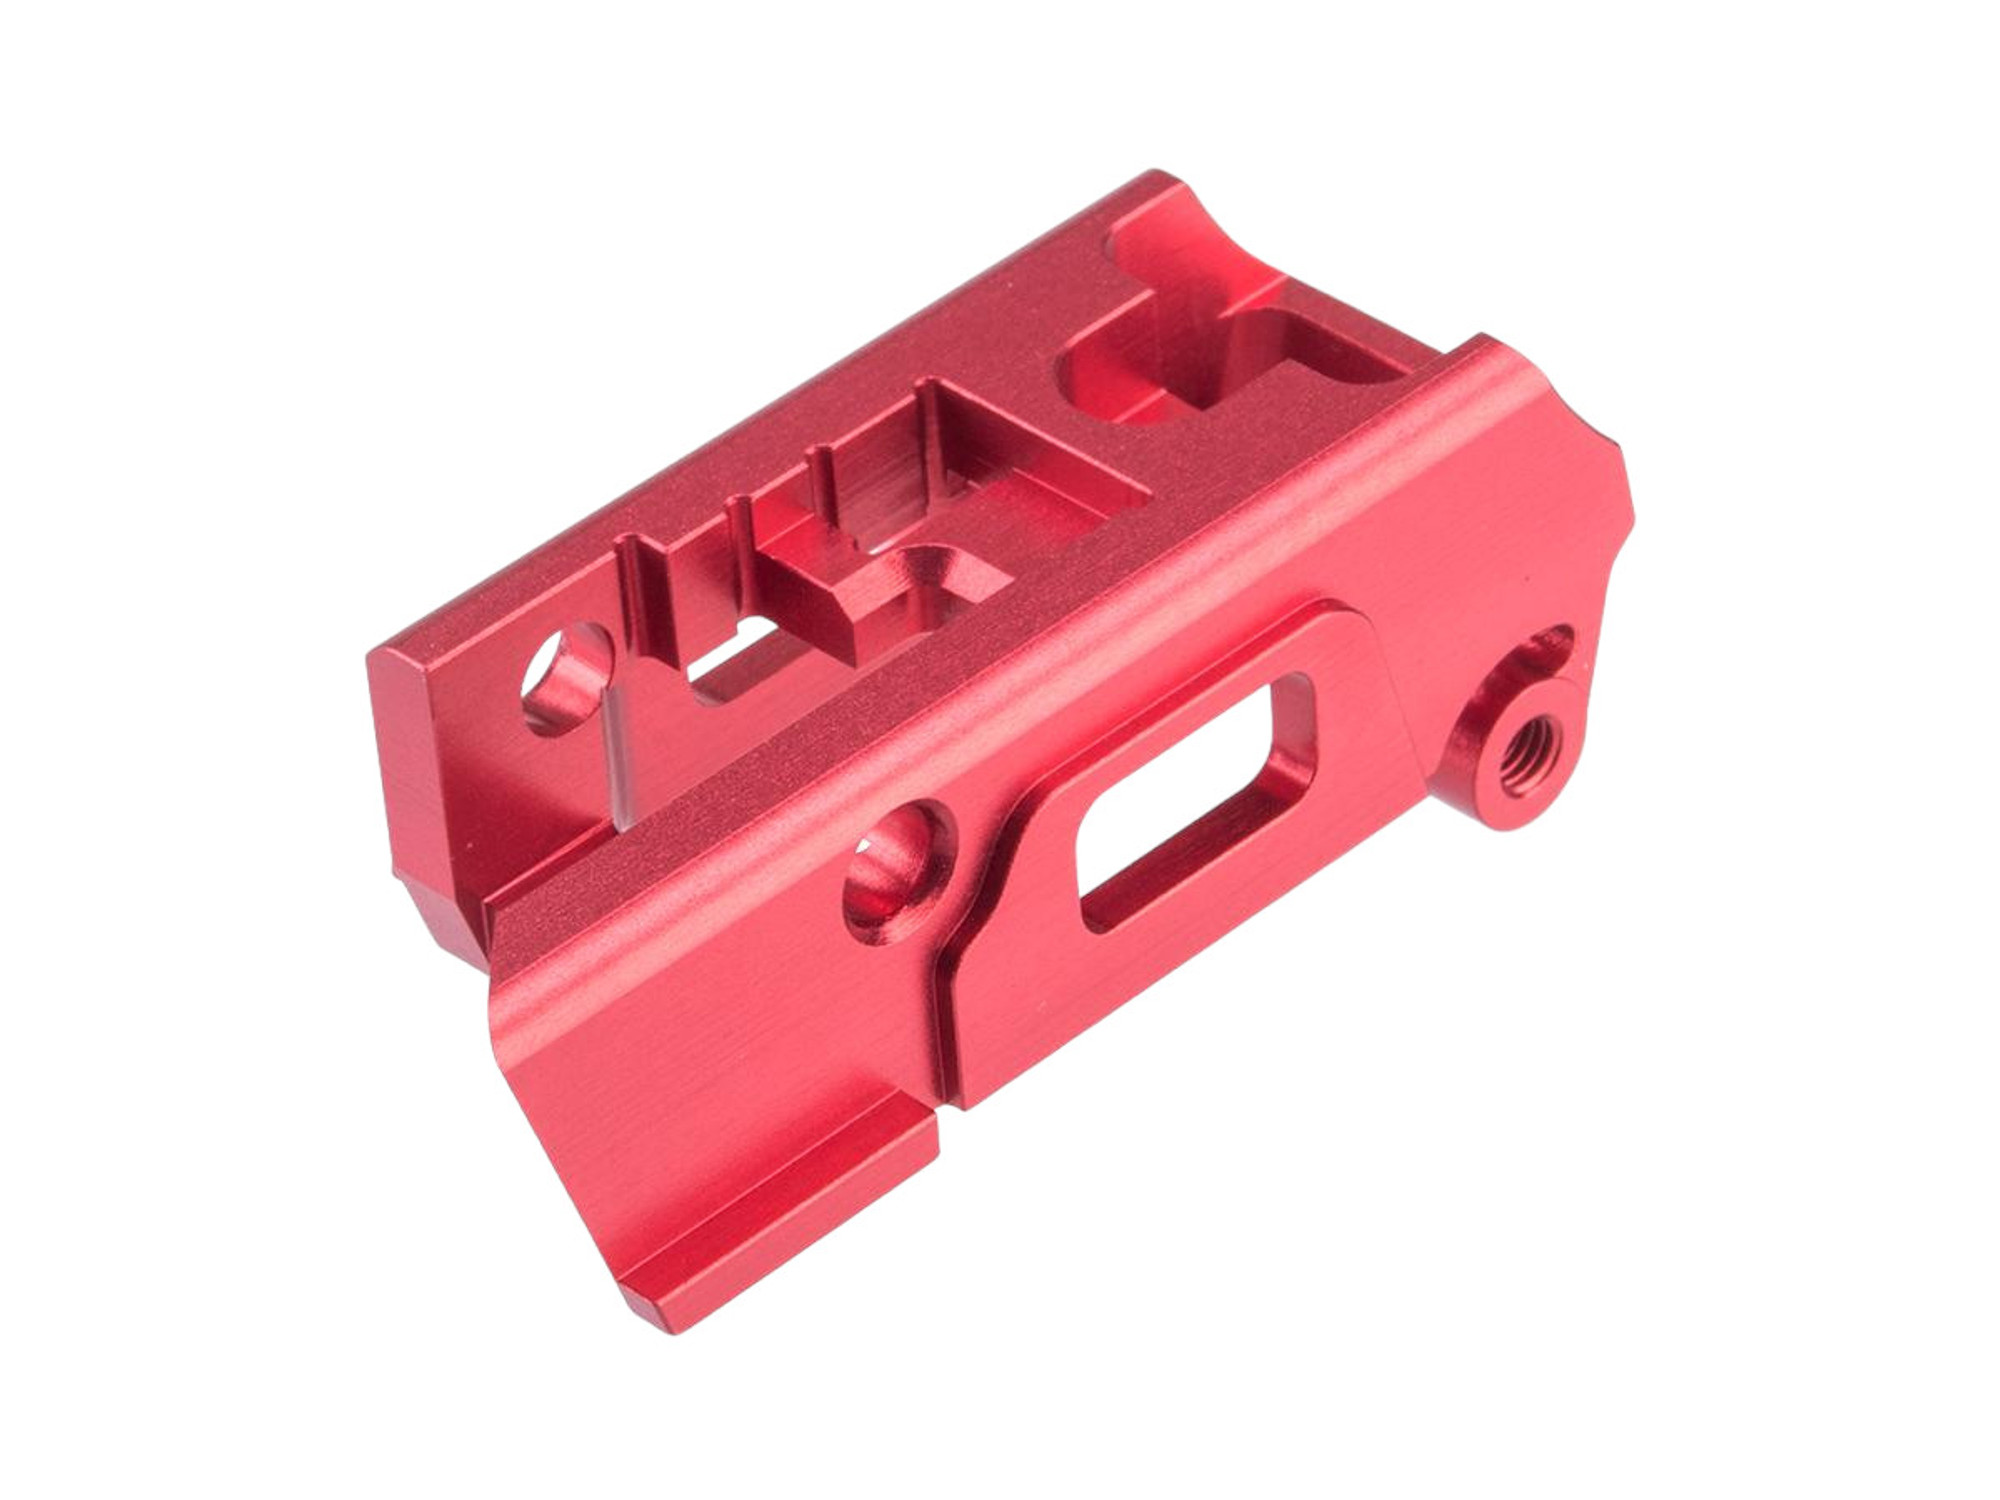 CowCow Technology Enhanced Trigger Housing for AAP-01 Airsoft Gas Blowback Pistol (Color: Red)